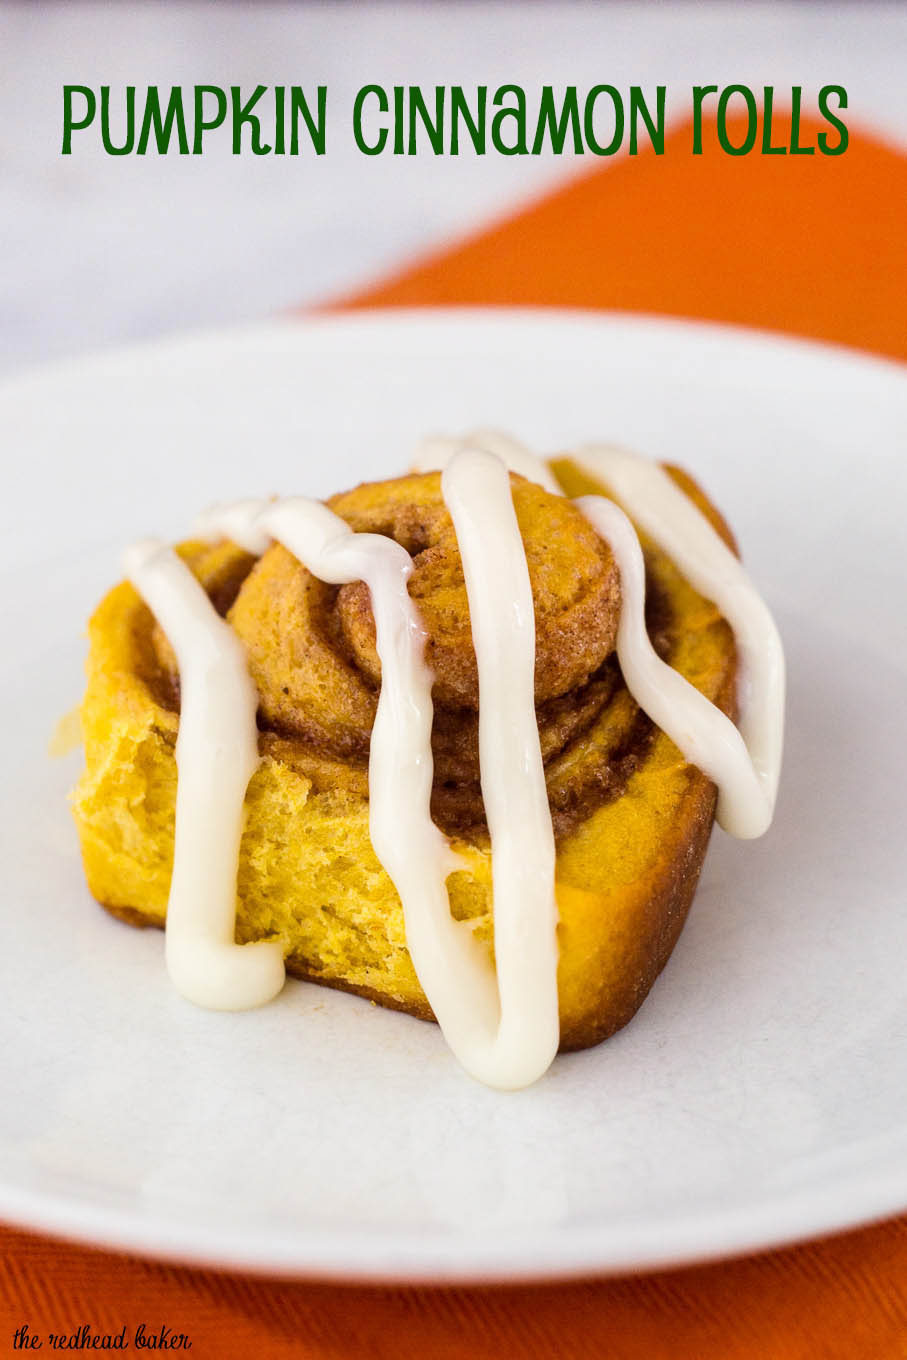 Pumpkin cinnamon rolls are a delicious way to start a fall morning! Sweet dough is flavored with pumpkin, rolled with a cinnamon filling, and topped with cream cheese drizzle. #PumpkinWeek